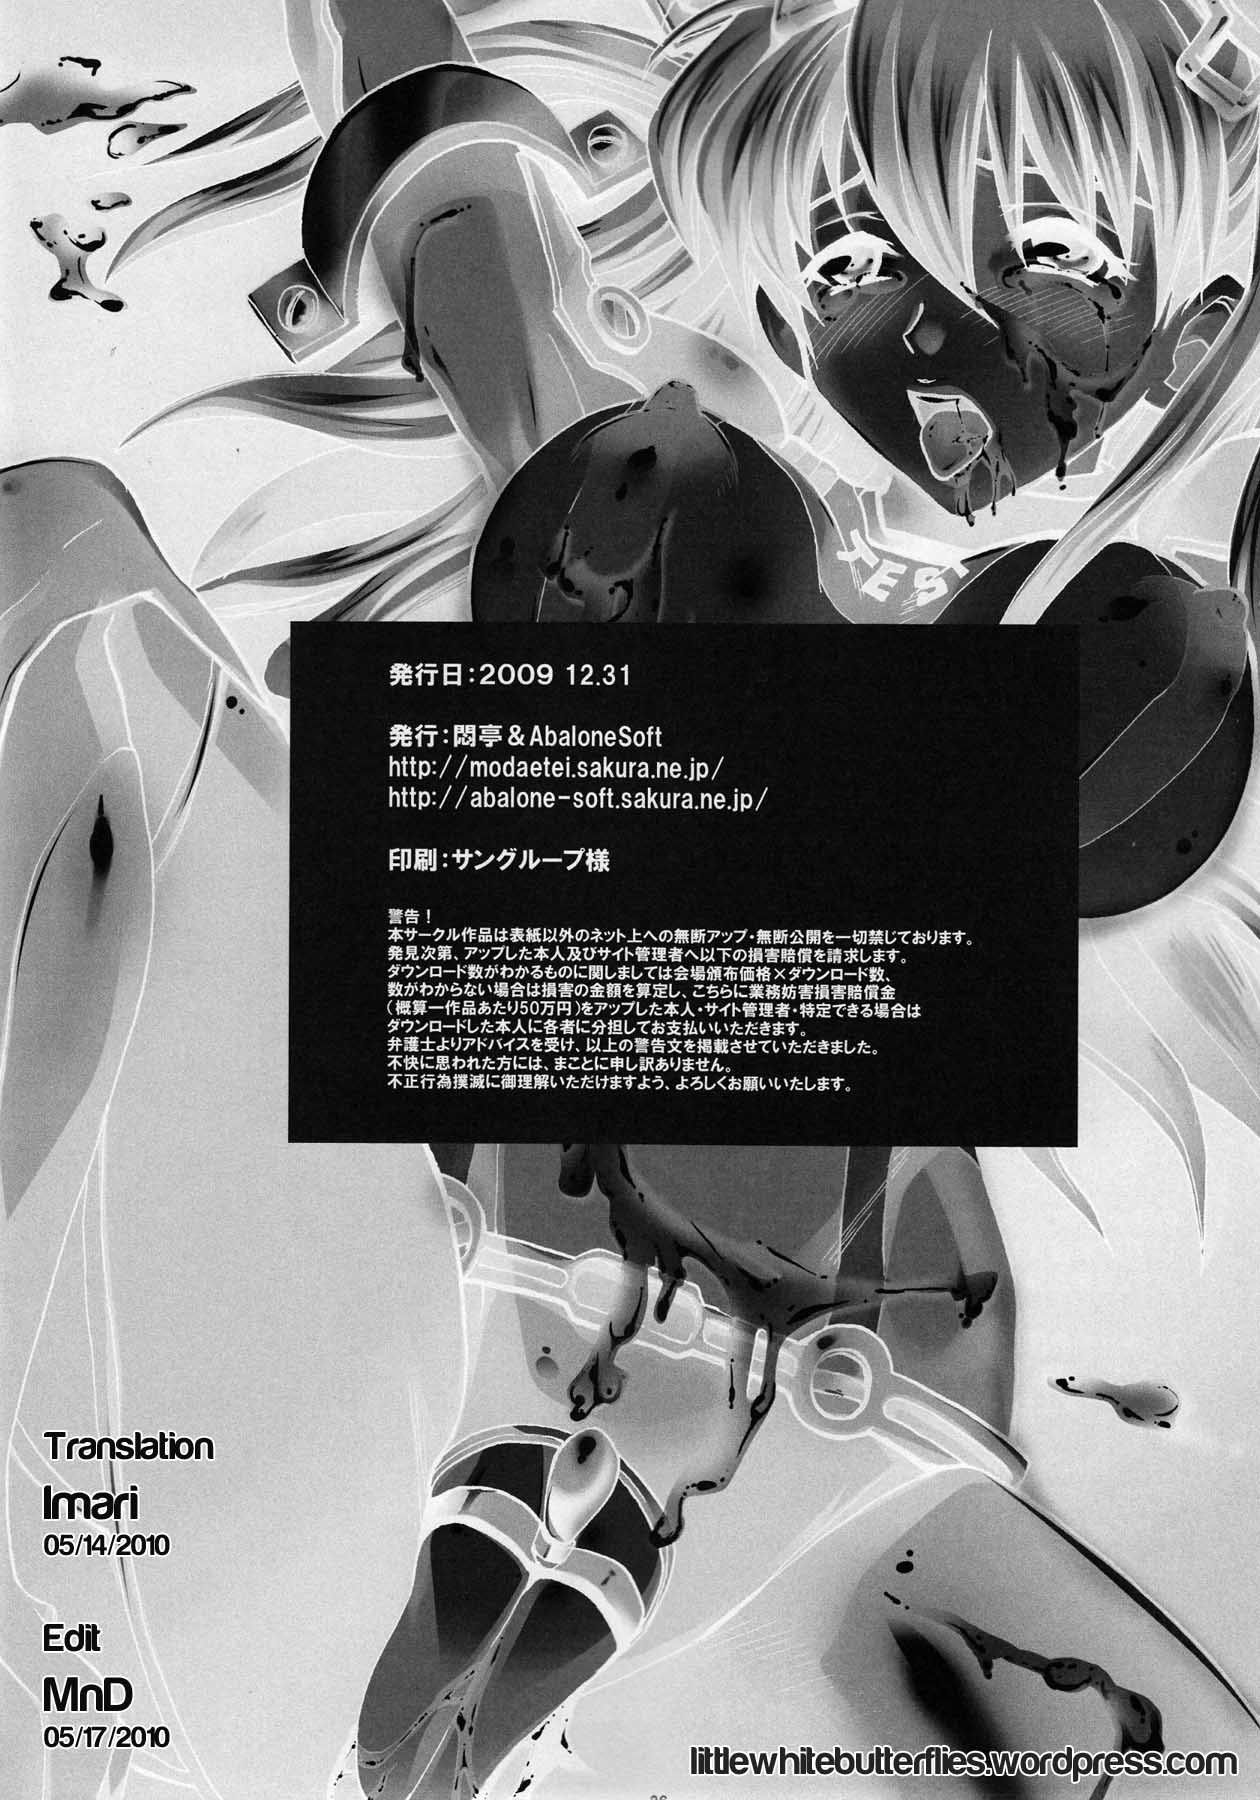 [Modaetei+Abalone Soft] Slave Suit and Fuck Toy (Neon Genesis Evangelion)[English][Little White Butterflies] page 25 full